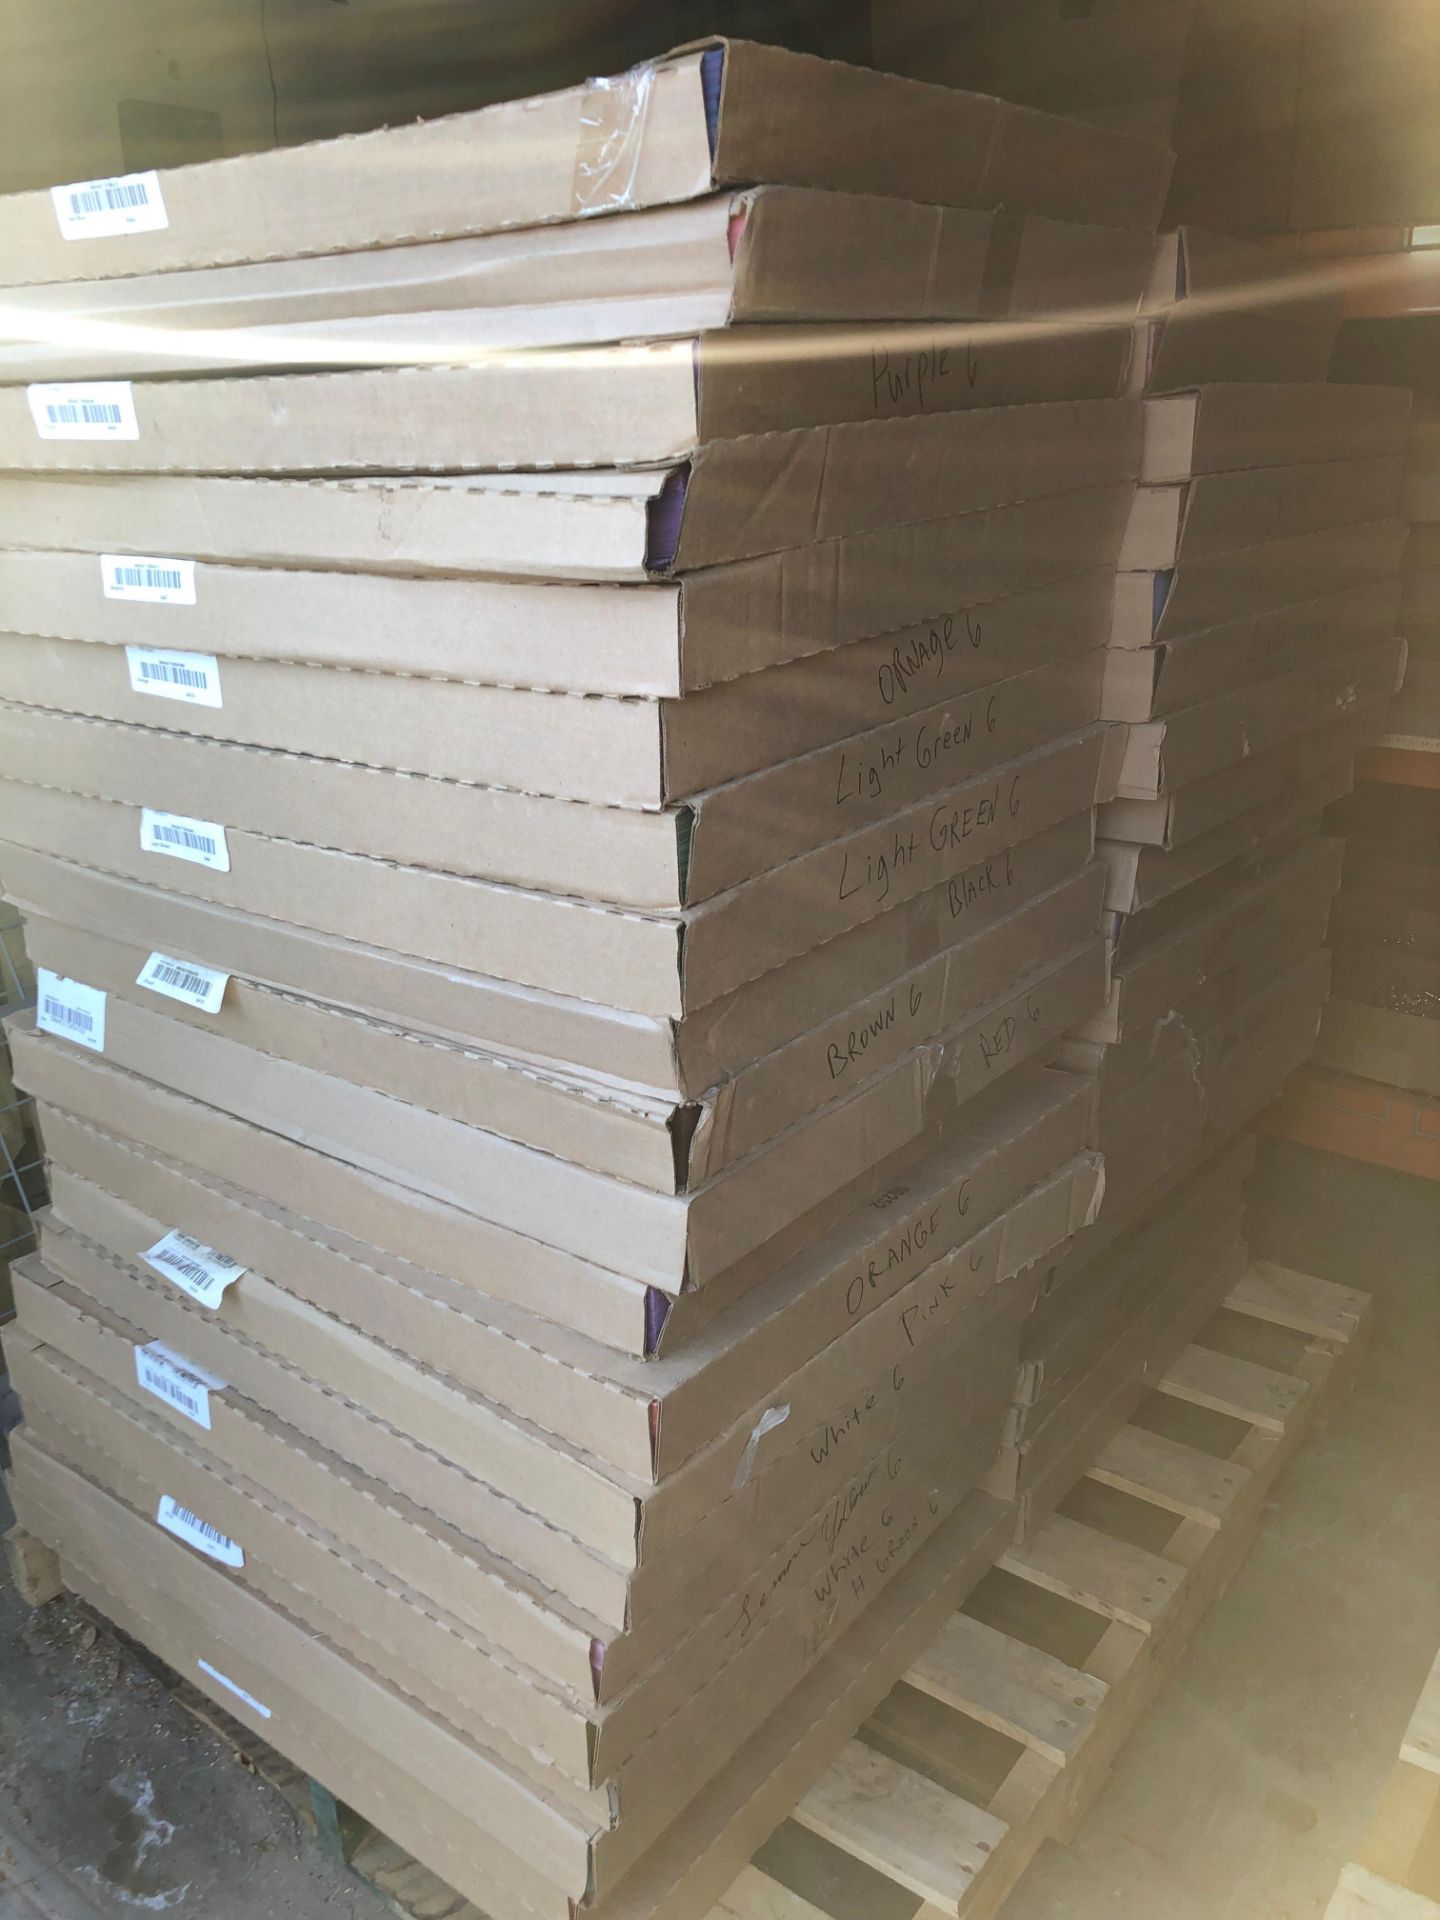 2 Pallets of Pacon Railroad Board Construction Paper, 93 Packs Retail avg. $49-75 EA ($4,650 Total)